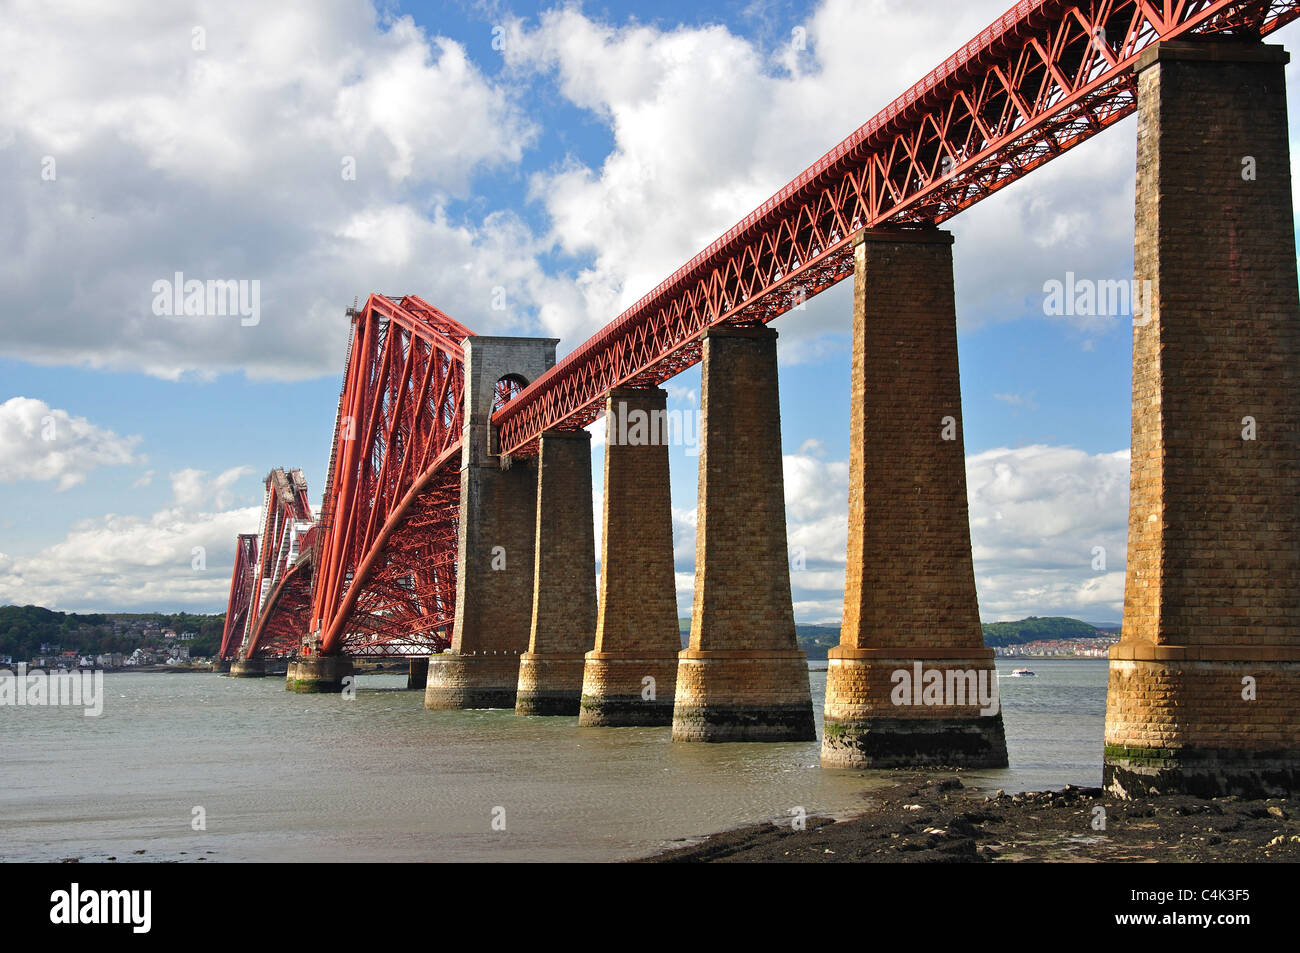 Le Forth Bridge de South Queensferry, Firth of Forth, Lothian, Ecosse, Royaume-Uni Banque D'Images